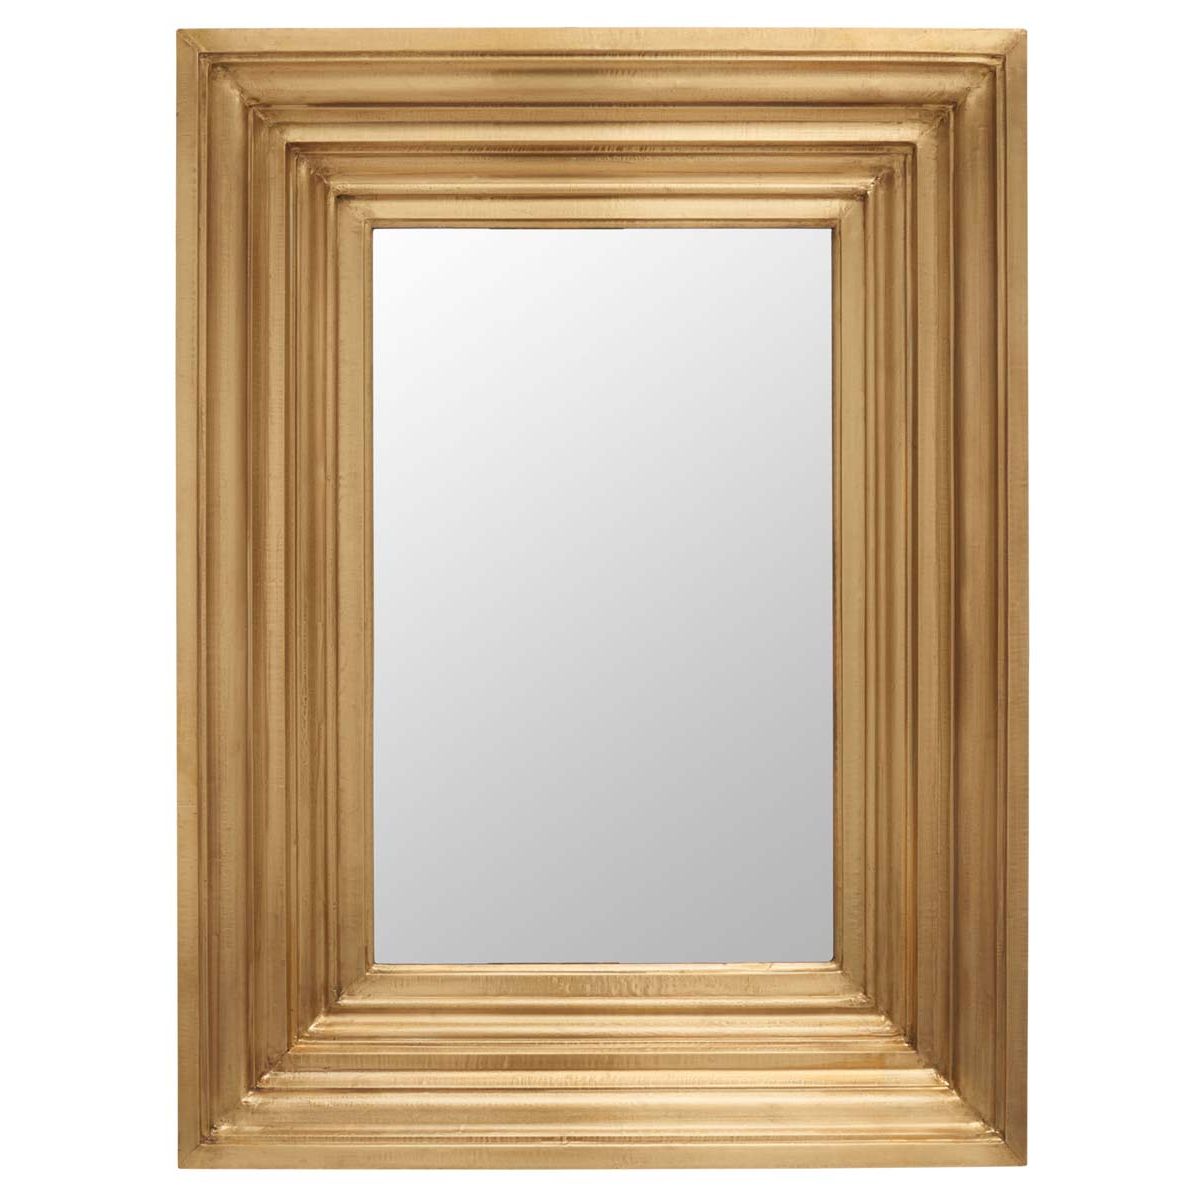 Safavieh Couture Kerry Small Rectangle Wall Mirror - Brass